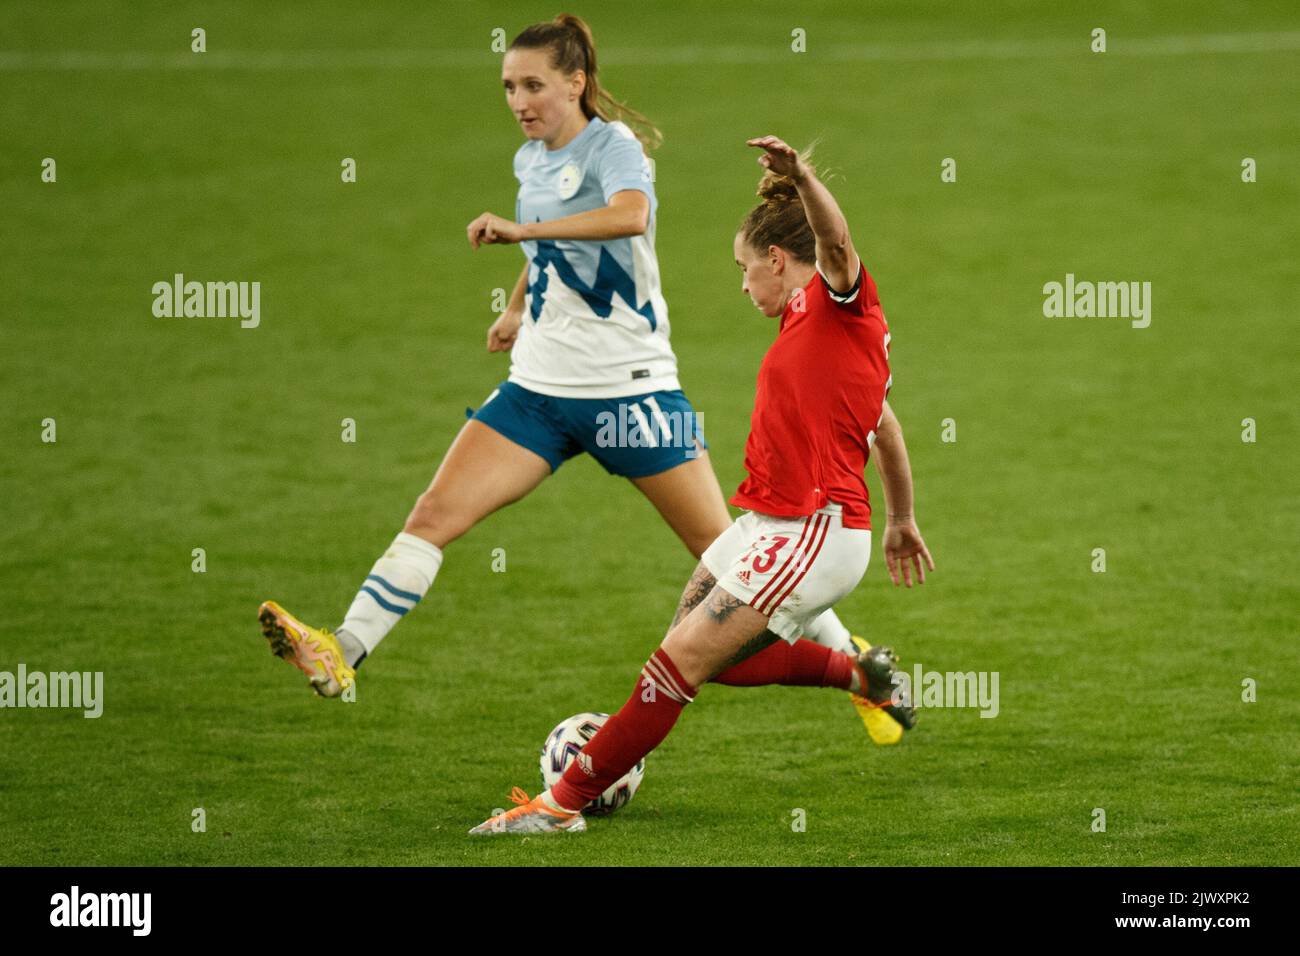 Cardiff, UK. 6th Sep, 2022. Gemma Evans of Wales shoots during the Wales v Slovenia Women's World Cup Qualification match. Credit: Gruffydd Thomas/Alamy Live News Stock Photo